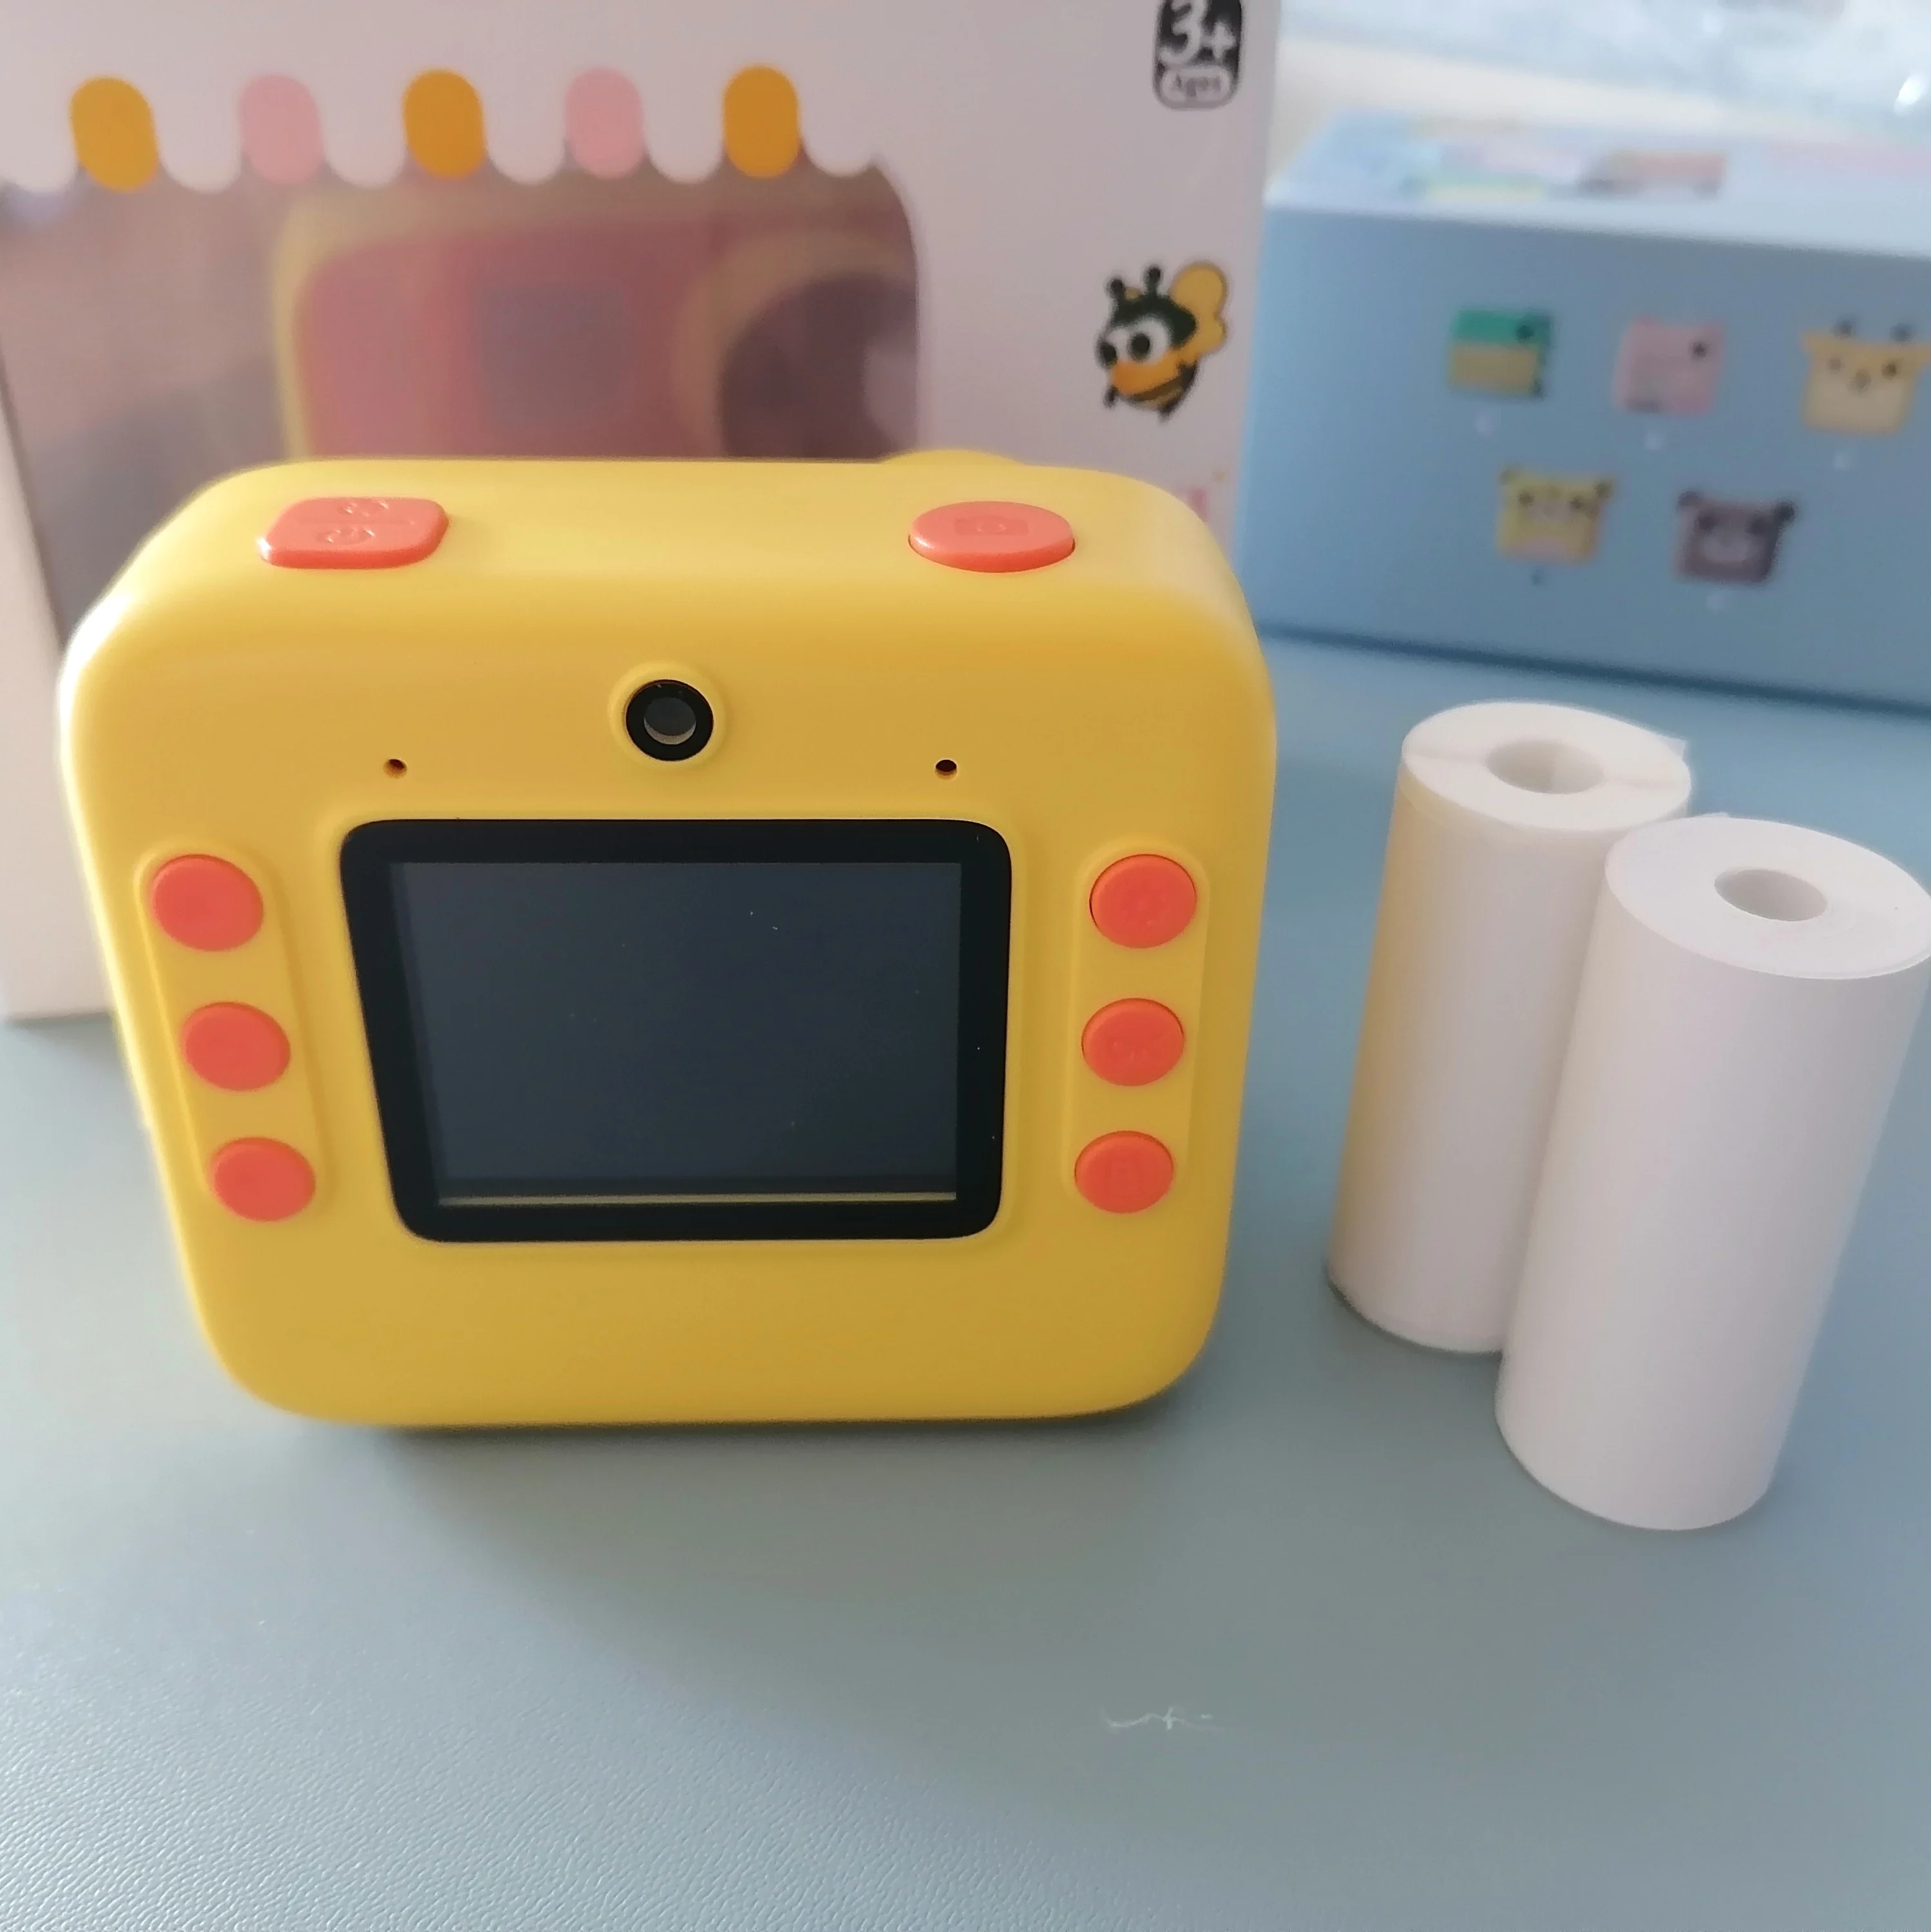 S1a37863760dc4e1ca387a9ee7f95018at Instant Print Kids Camera 2.0" 1080P Video Photo with Thermal Print Paper